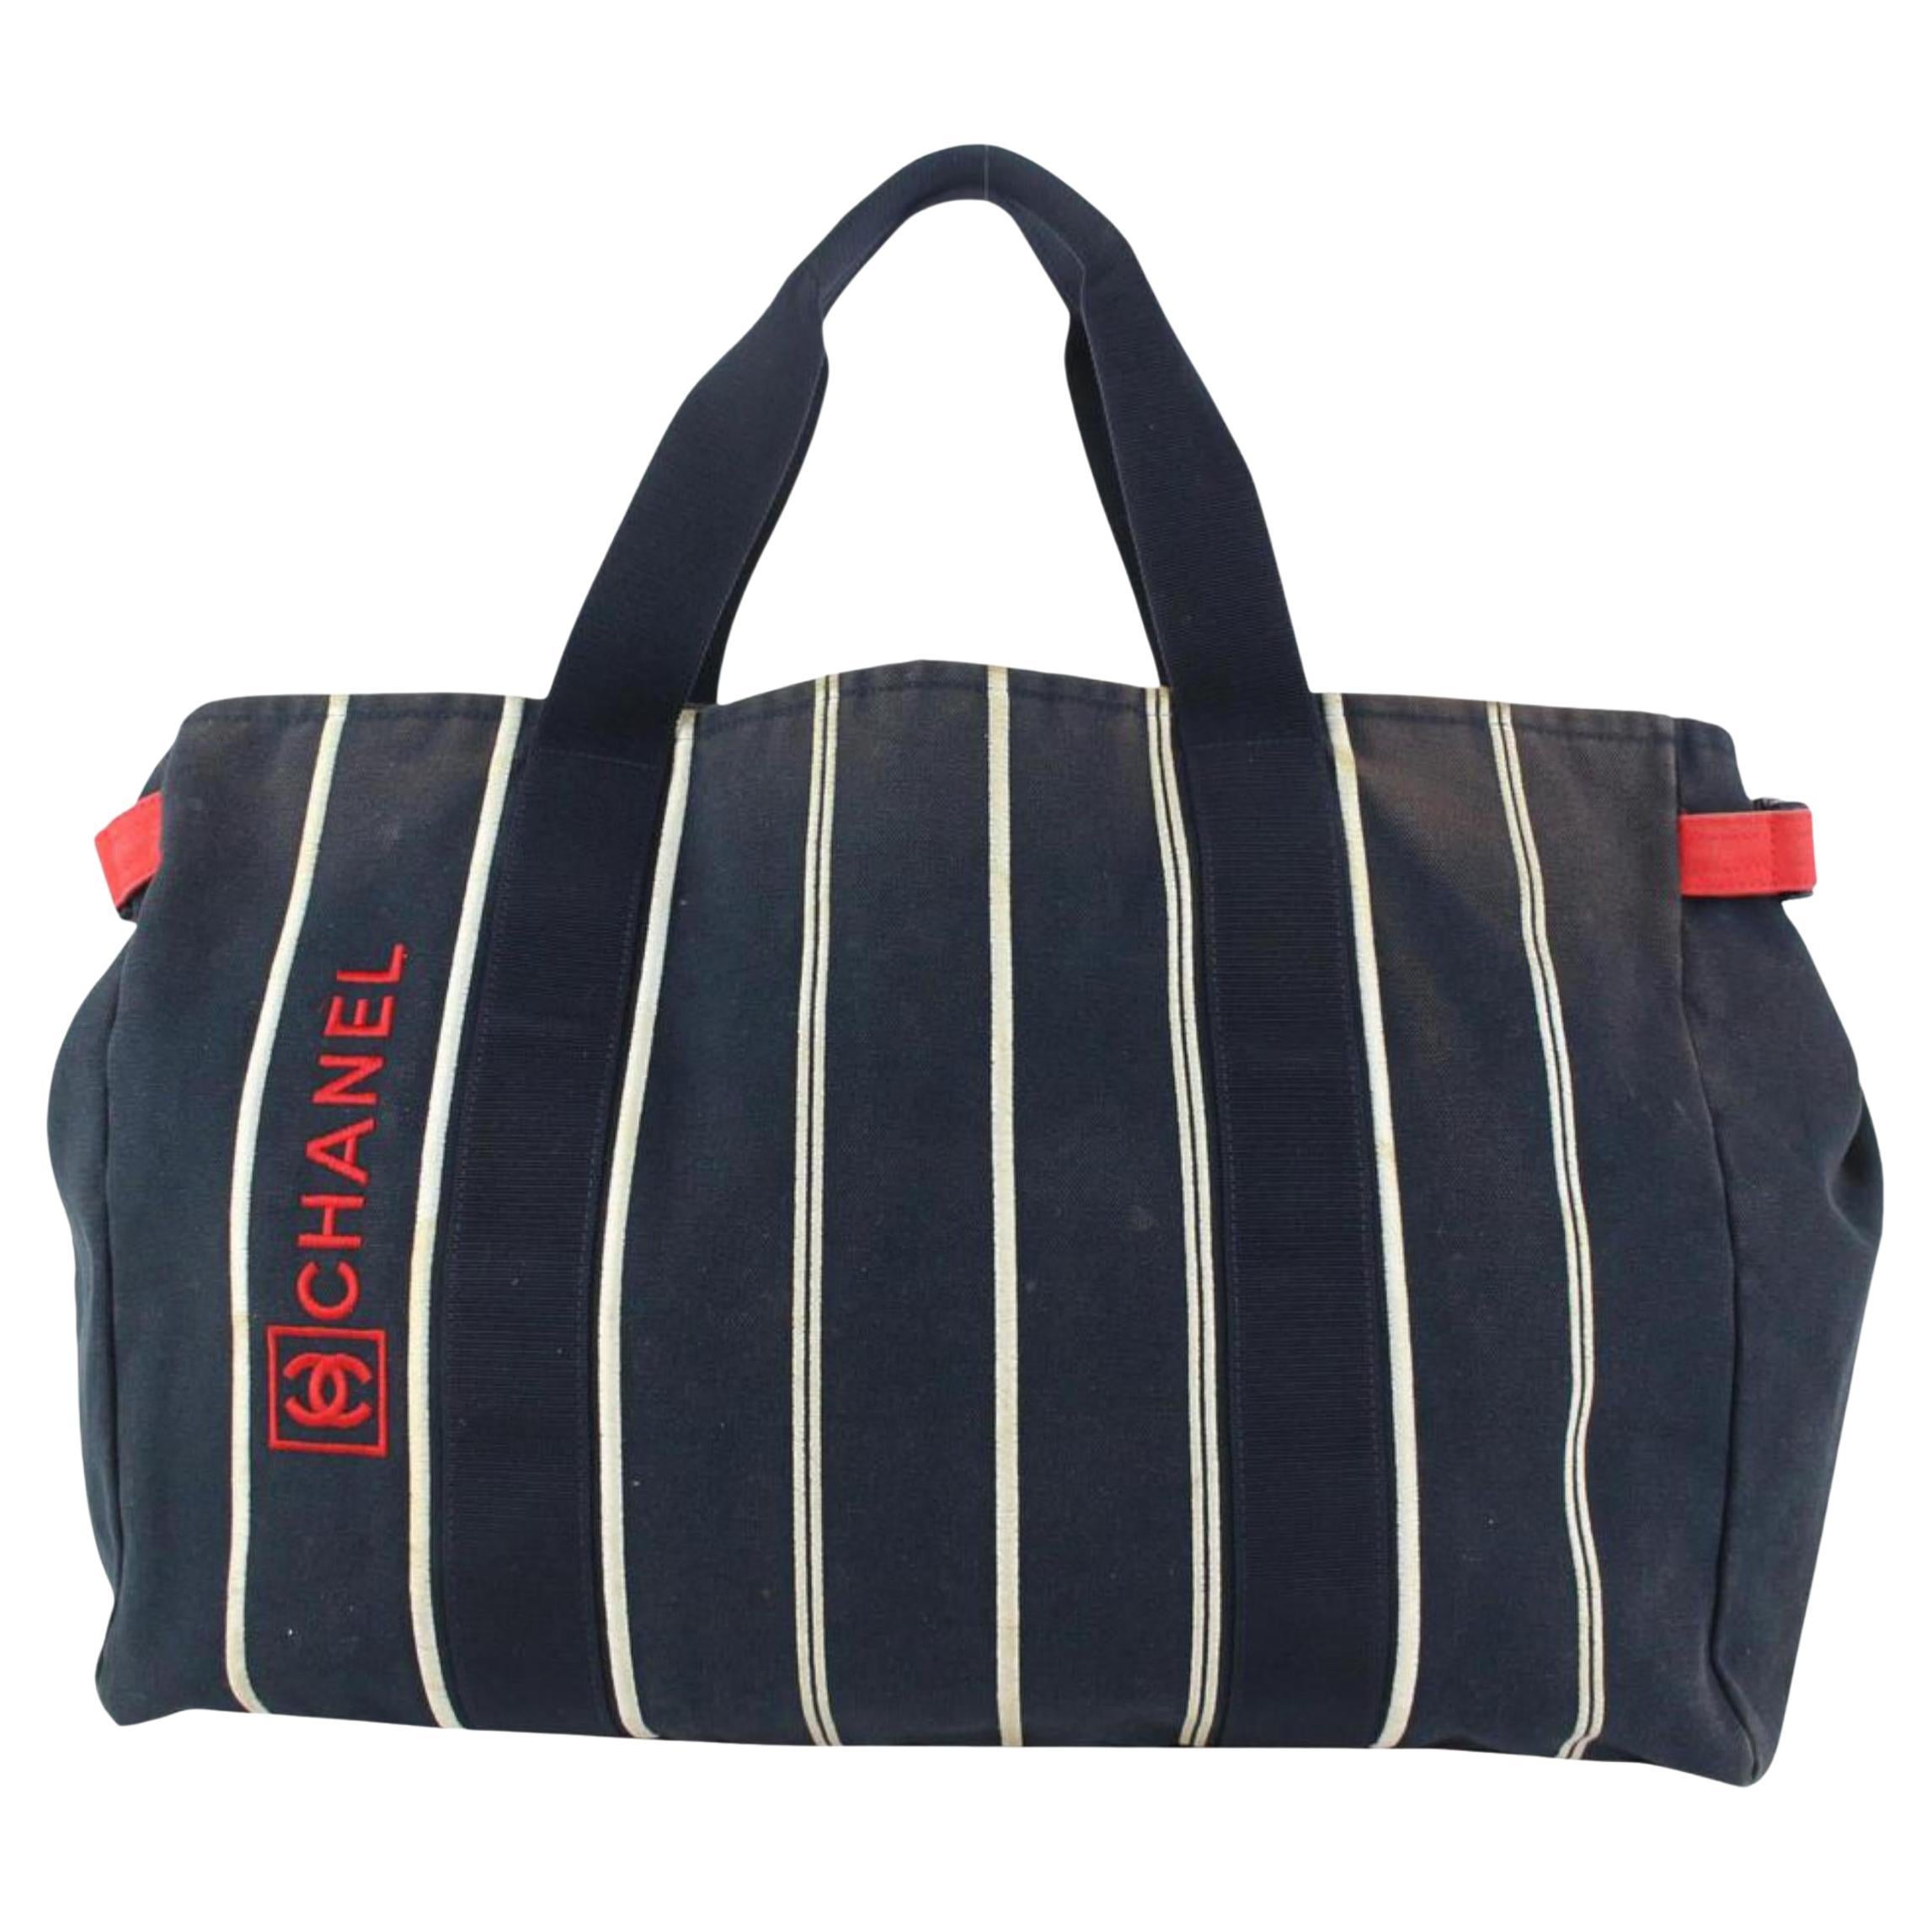 Chanel Navy Blue Stripe Sports Line Duffle Tote bag 929c98 For Sale